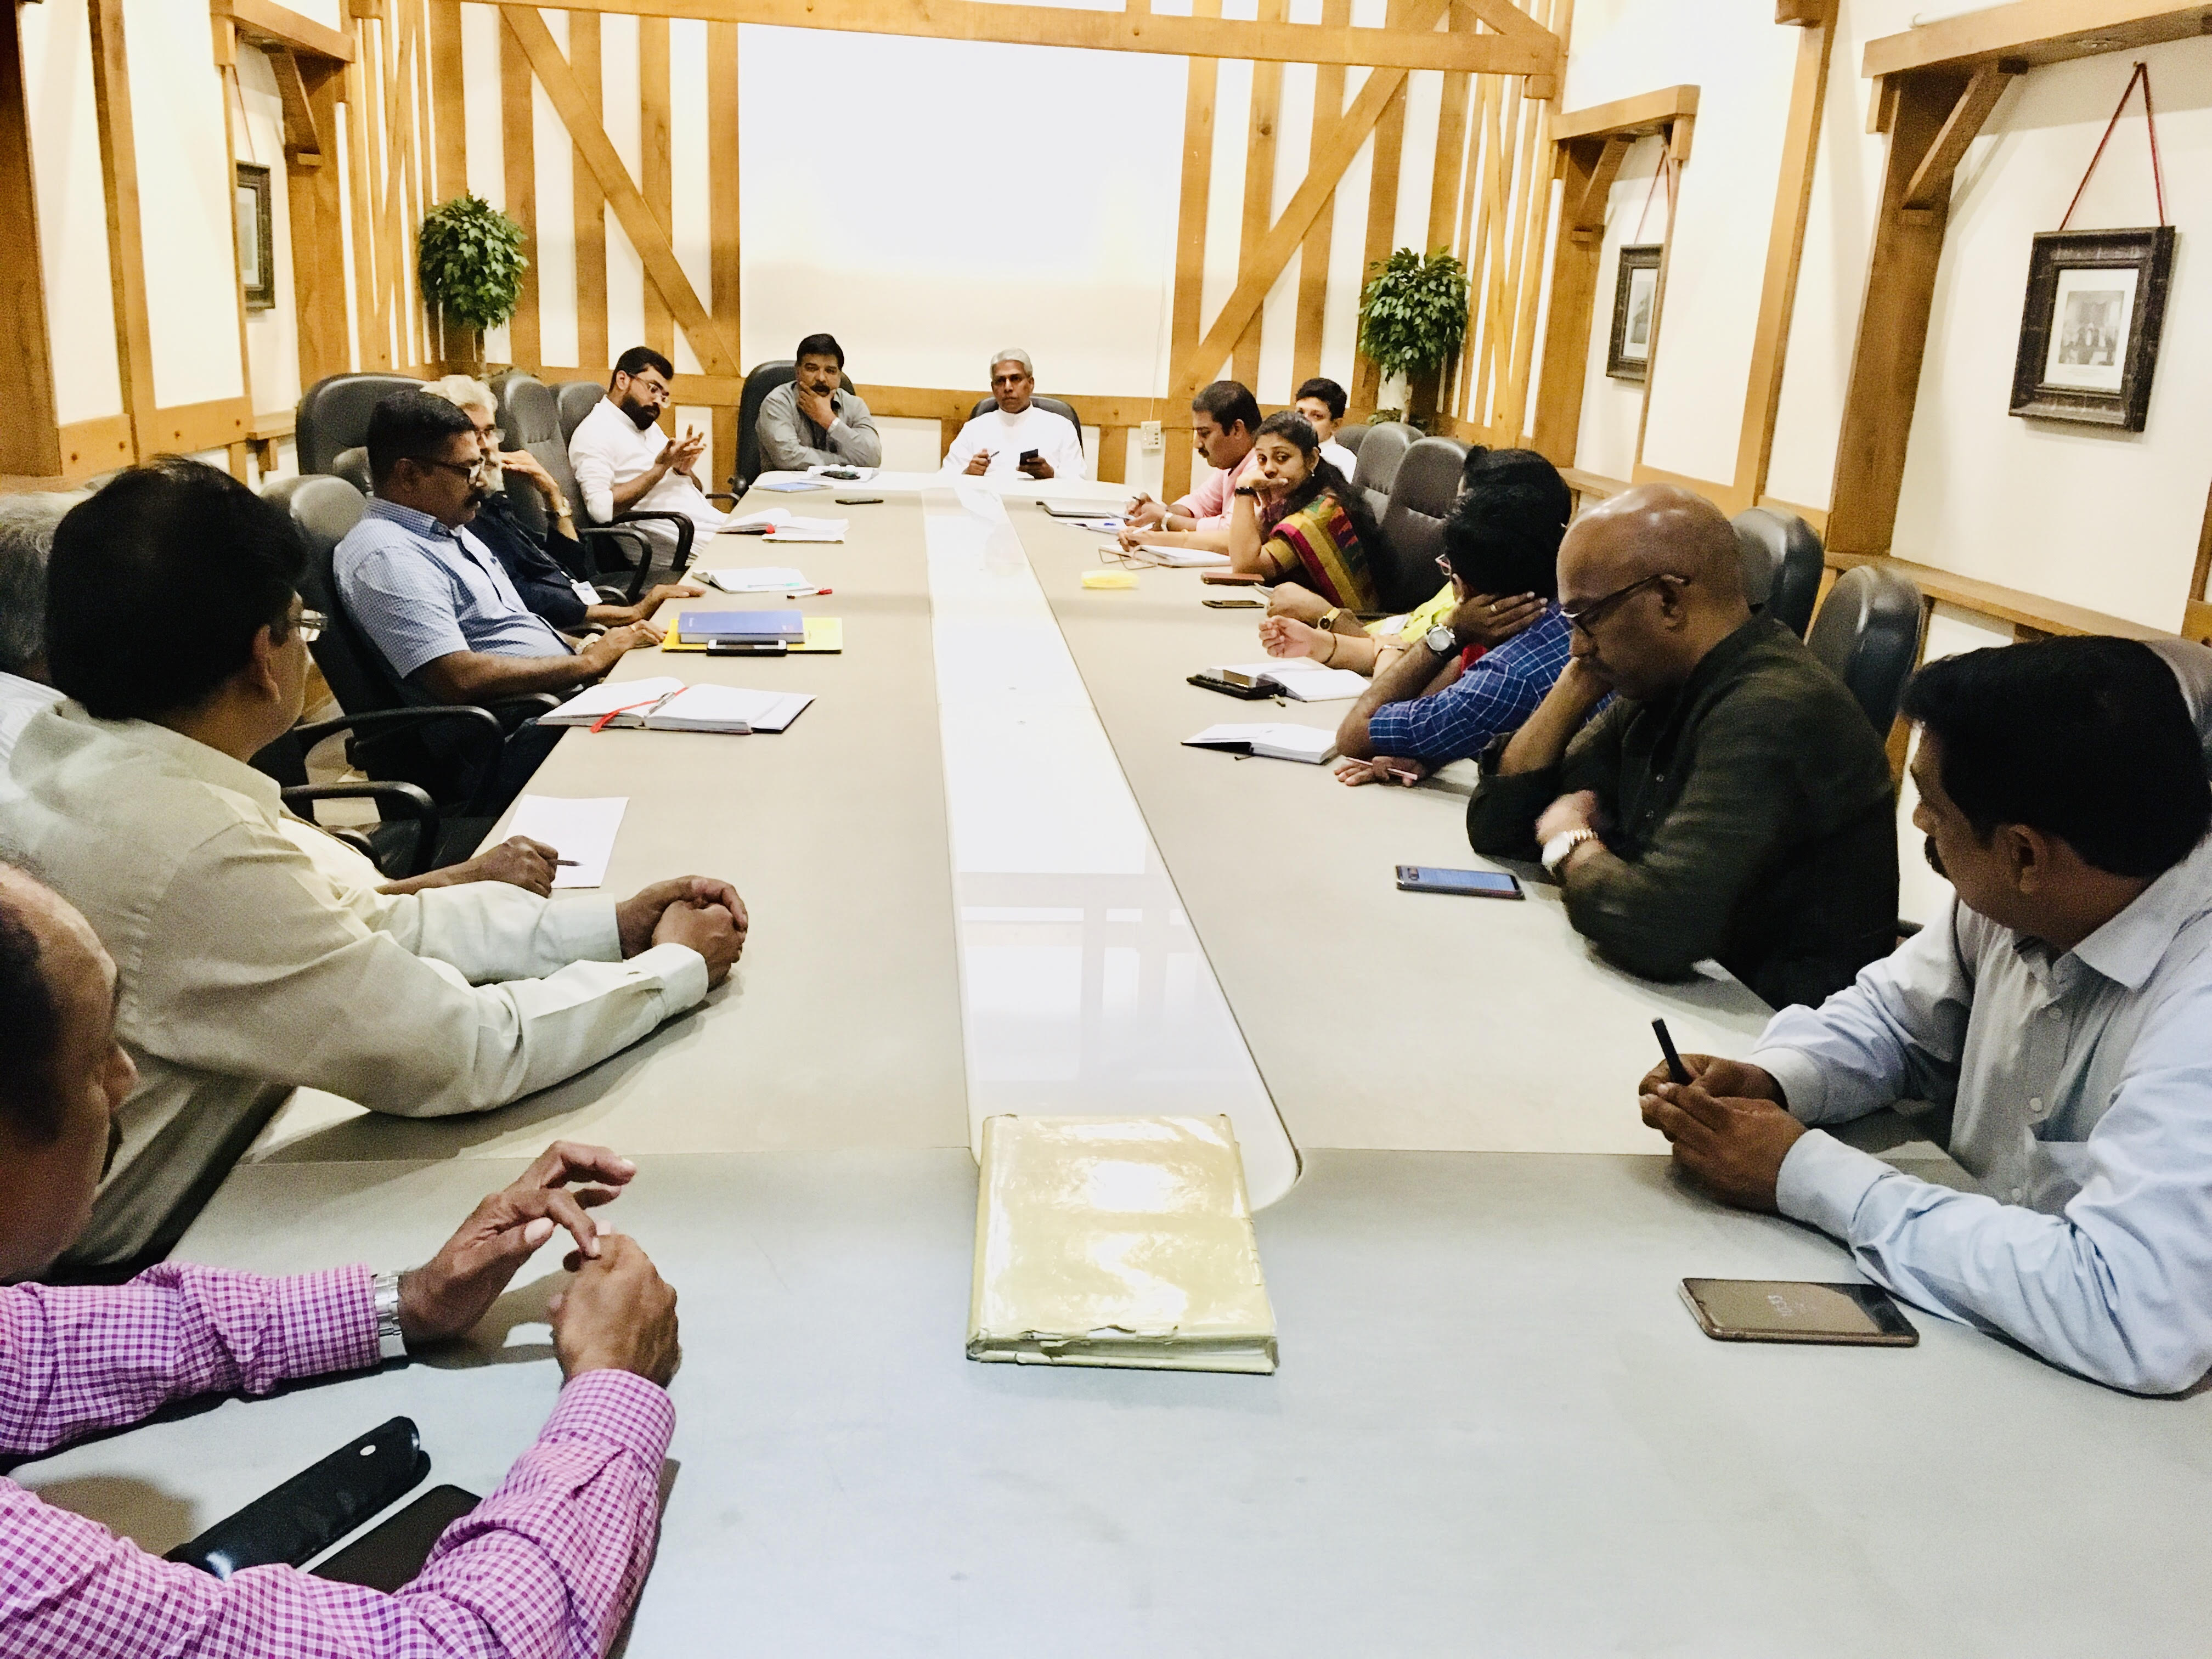 St. Albert’s College (Autonomous) Executive Meeting held on 25 th November 2019 Chaired by Chairman Rev. Fr. Antony Arackal